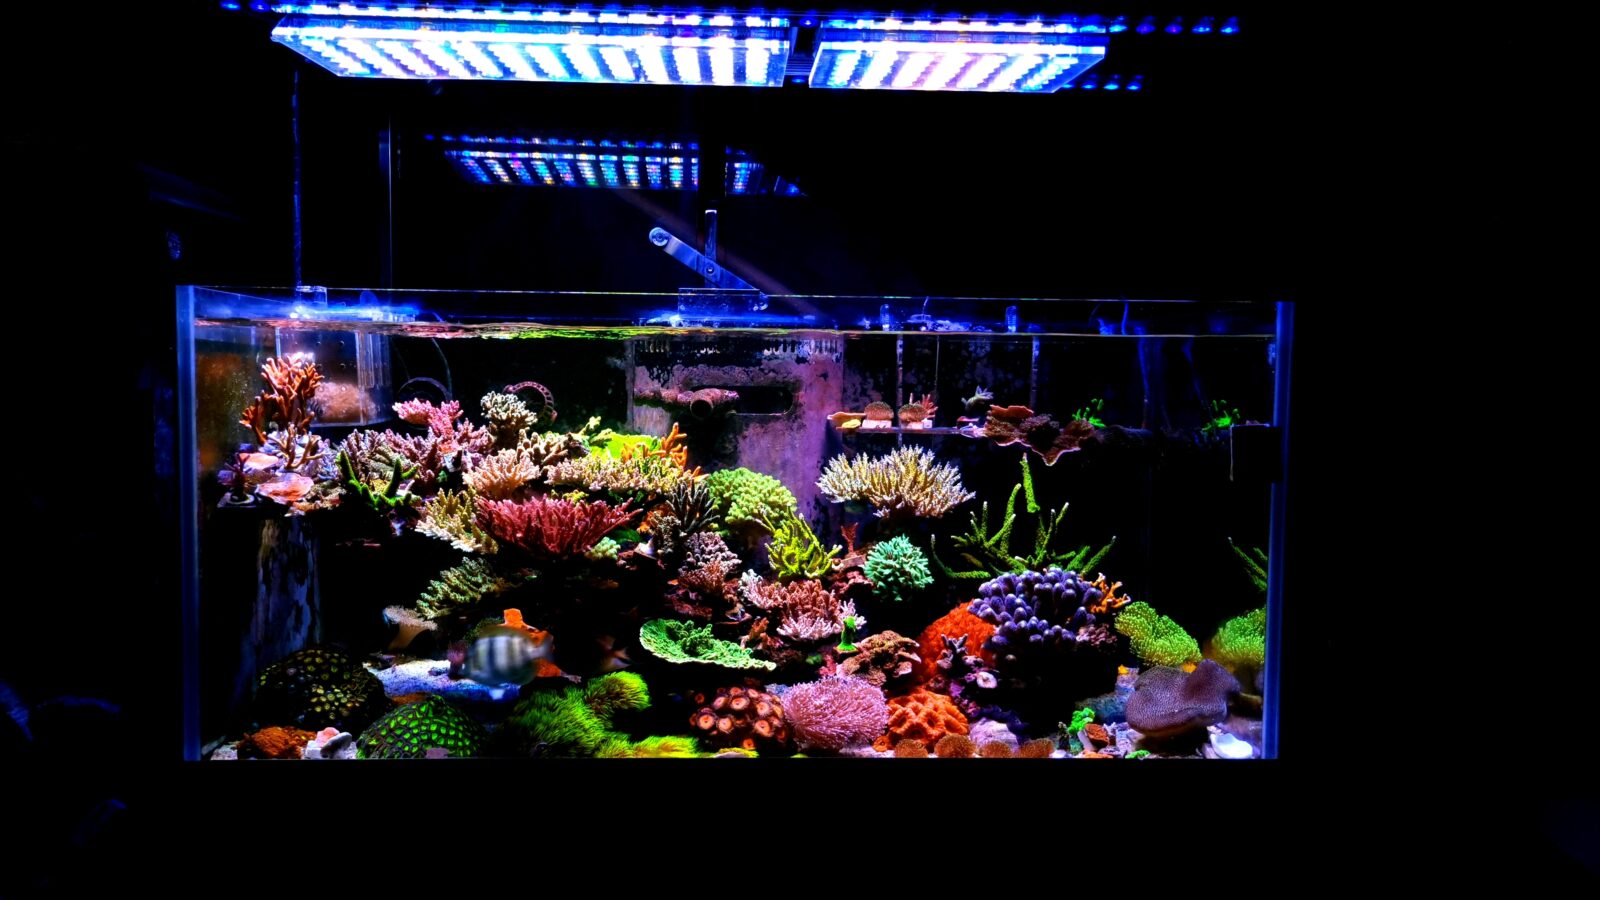 Amazing SPS dominated reef tank lighted by Atlantik & OR3 LED